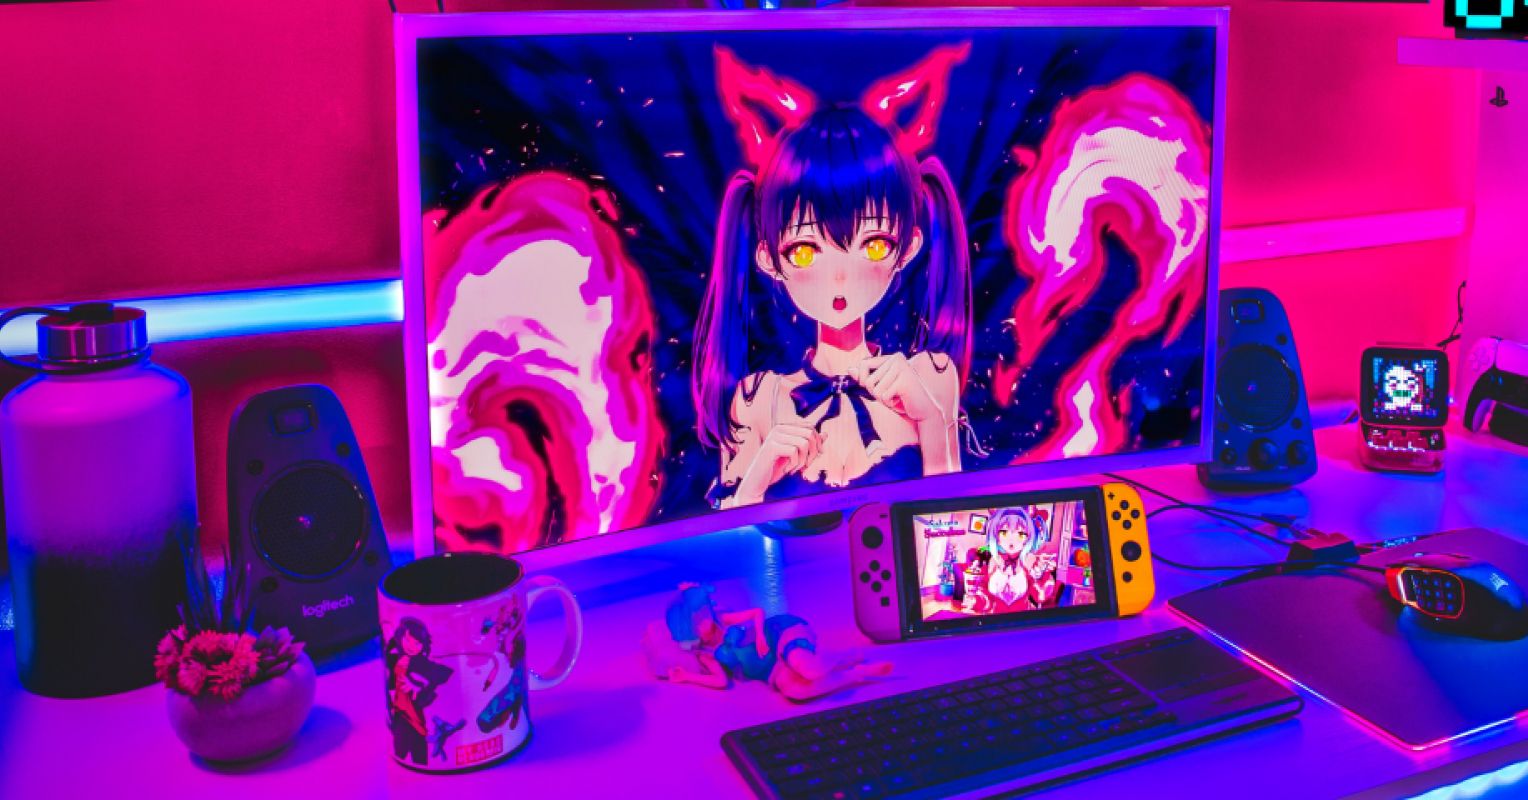 Anime Hentai Pc - Why Animated Porn Is So Popular | Psychology Today